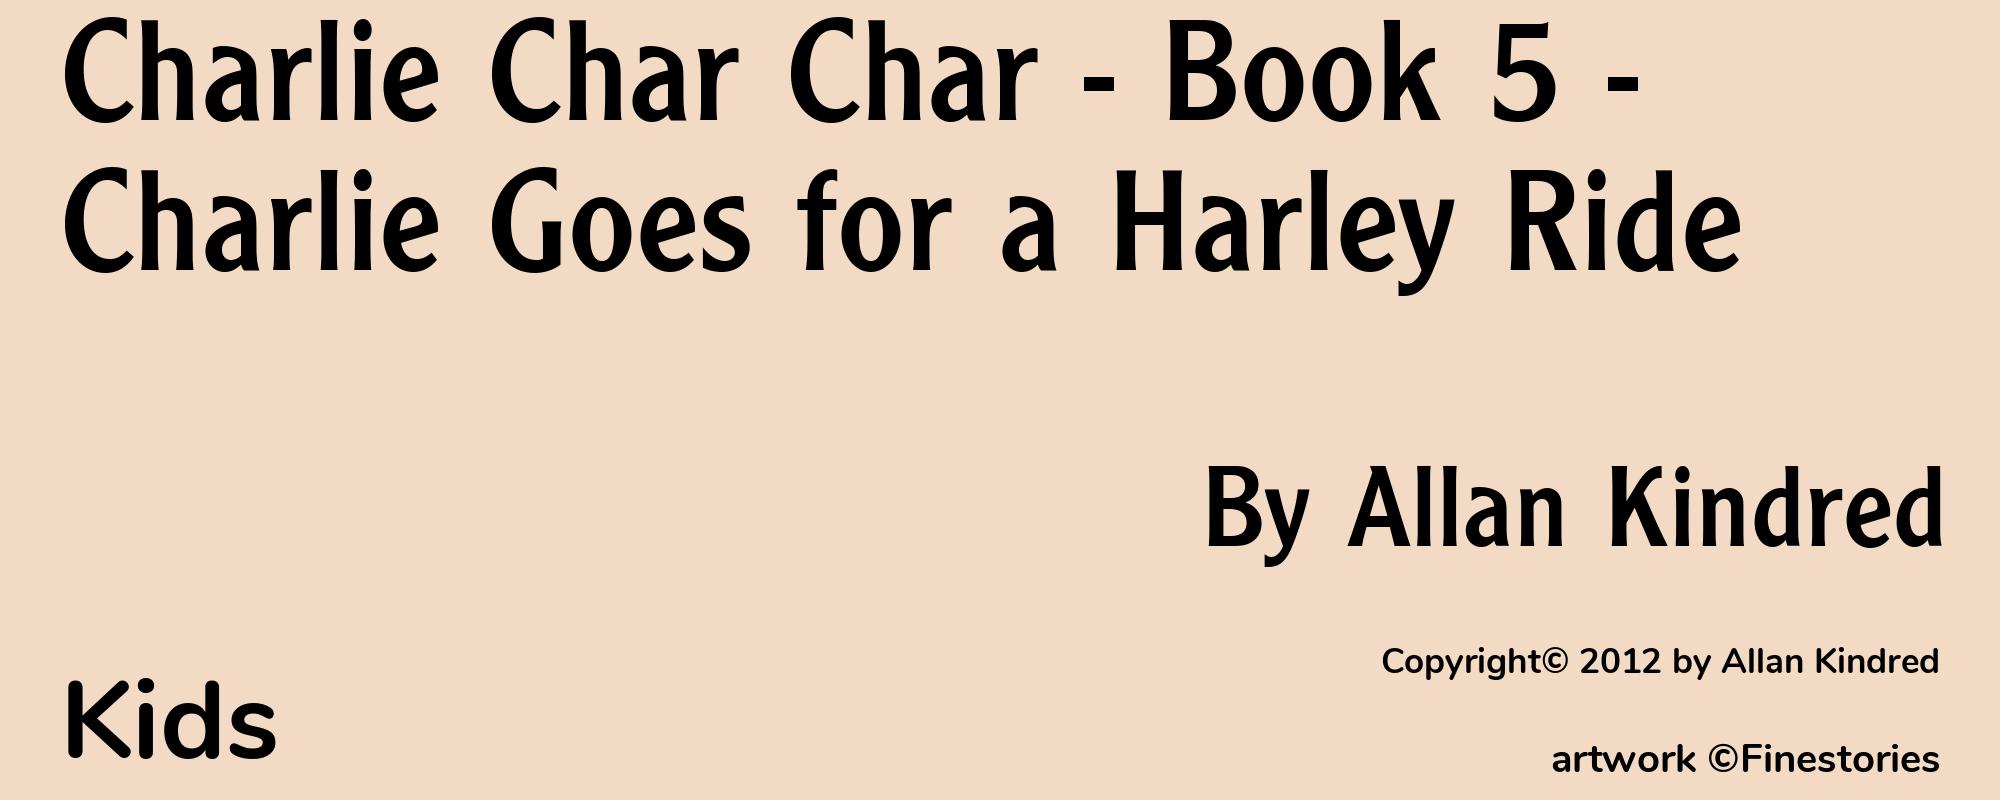 Charlie Char Char - Book 5 - Charlie Goes for a Harley Ride - Cover